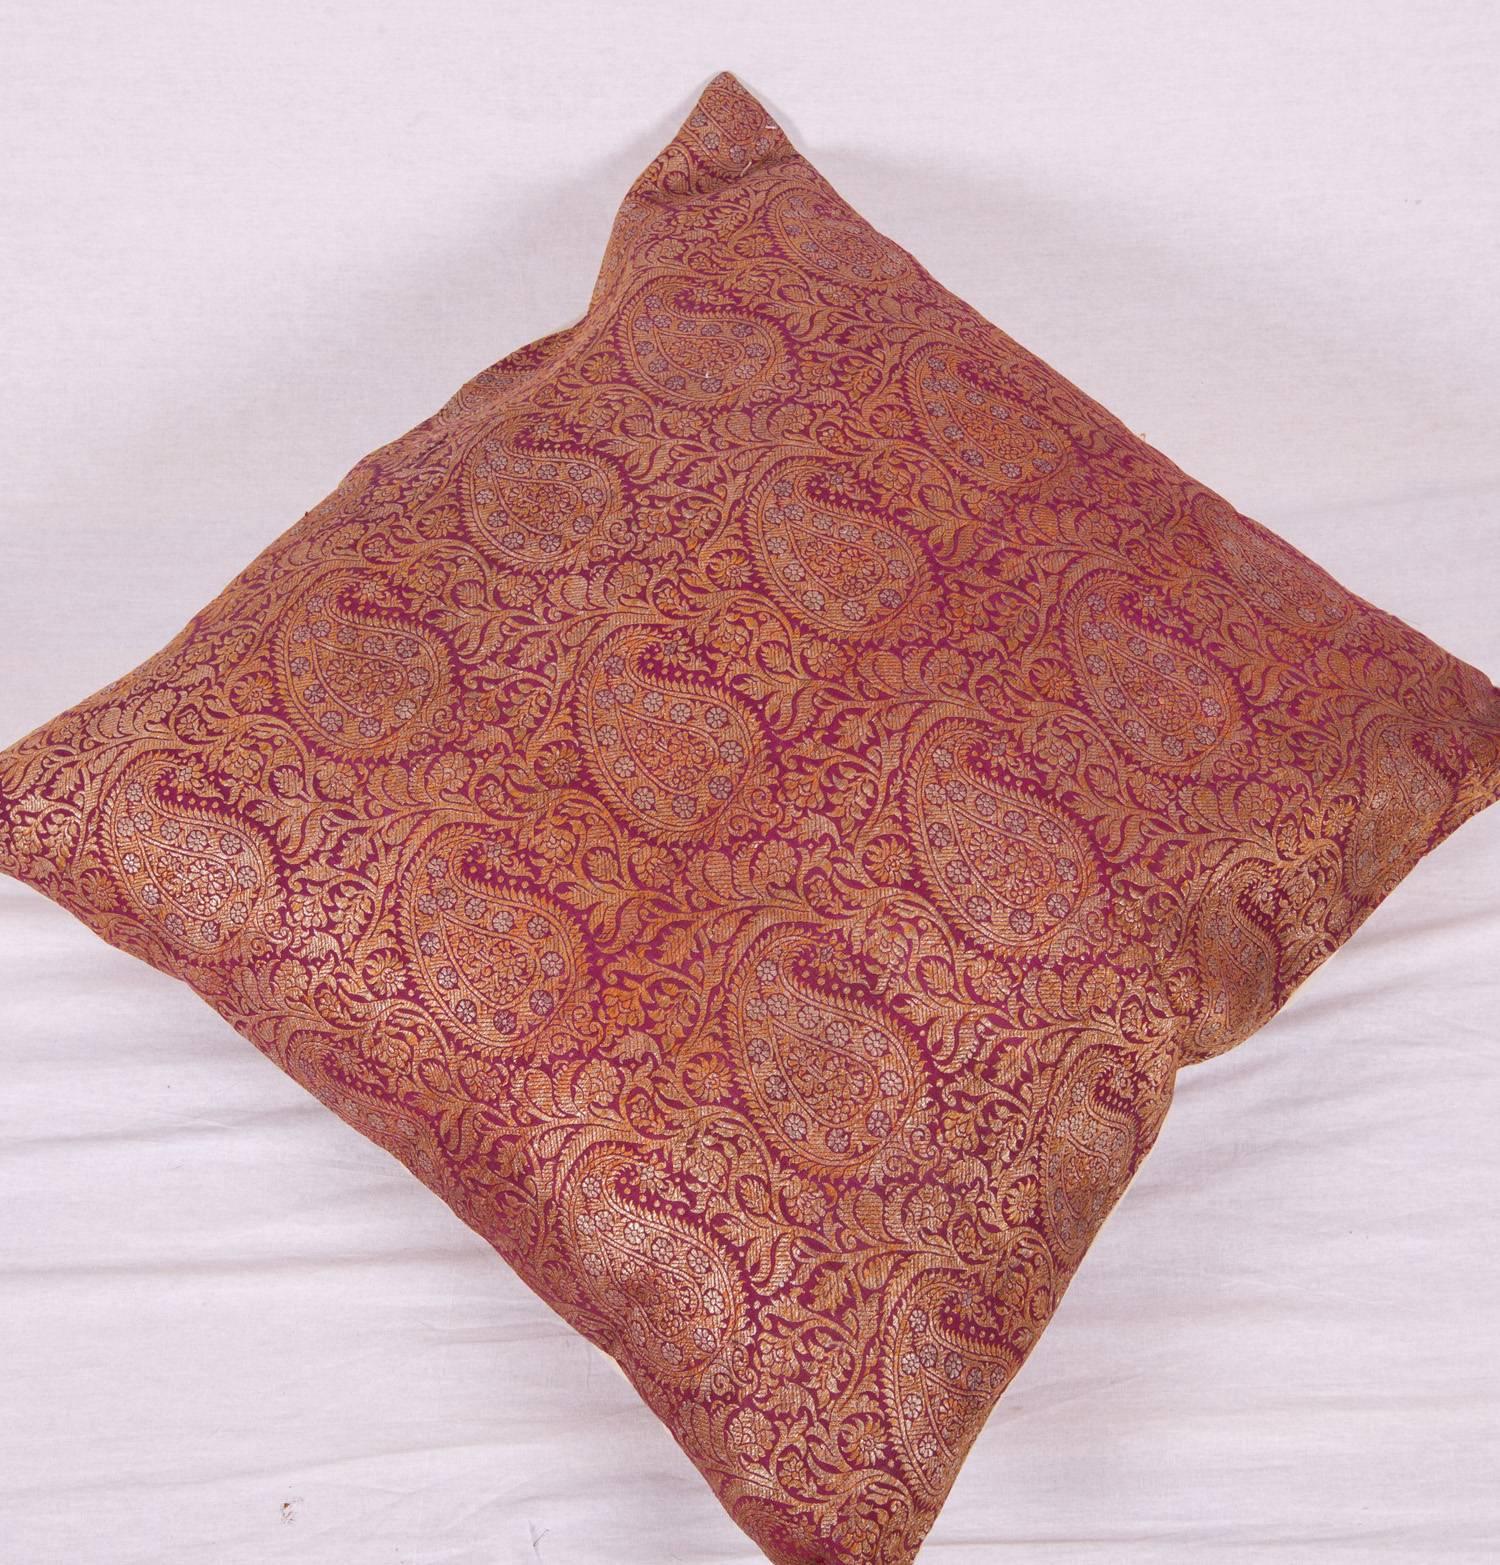 Metallic Thread Antique Pillow Case Fashioned from Early 20th Century Indian Zari Brocade For Sale